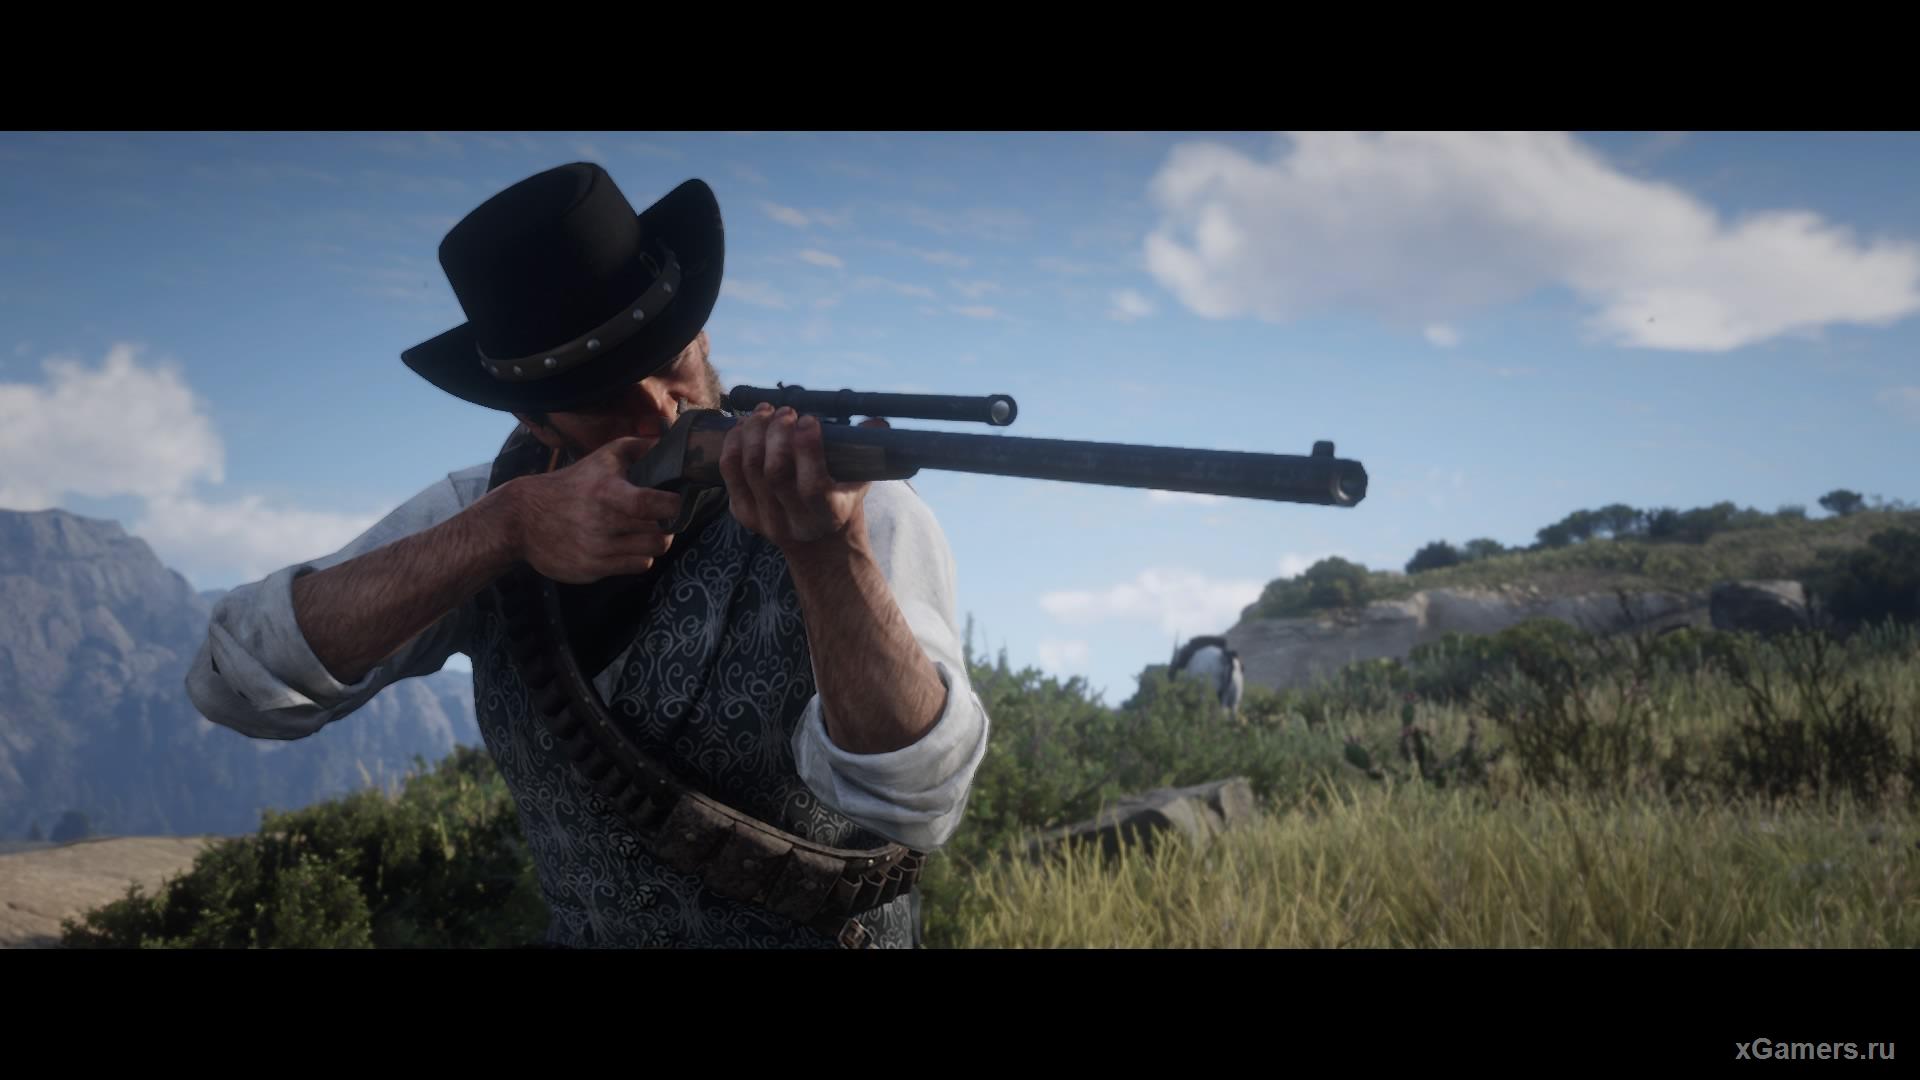 Arthur Morgan - a multifaceted personality